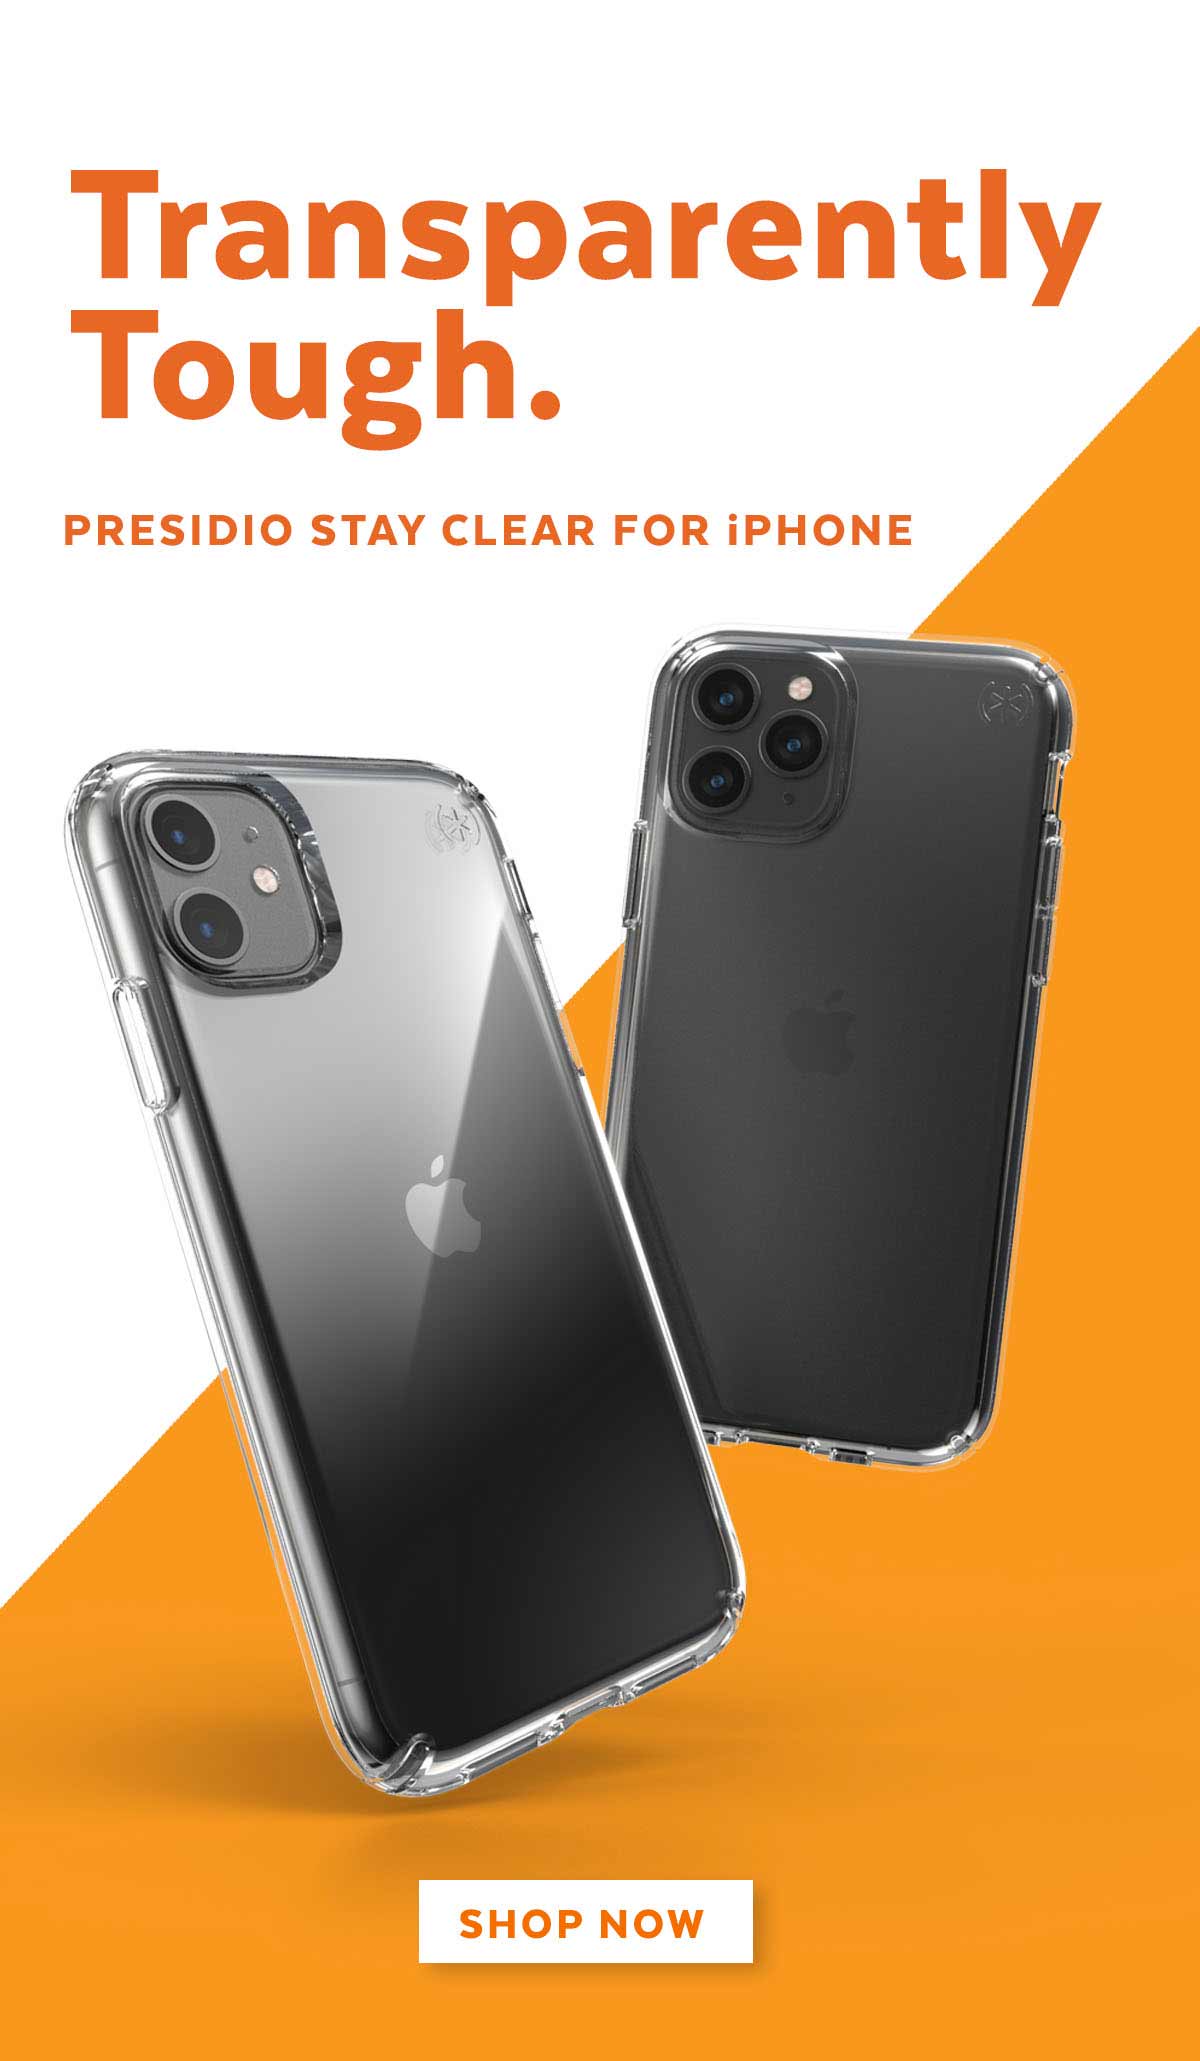 Transparently tough. Presidio stay clear for iPhone. Shop now.